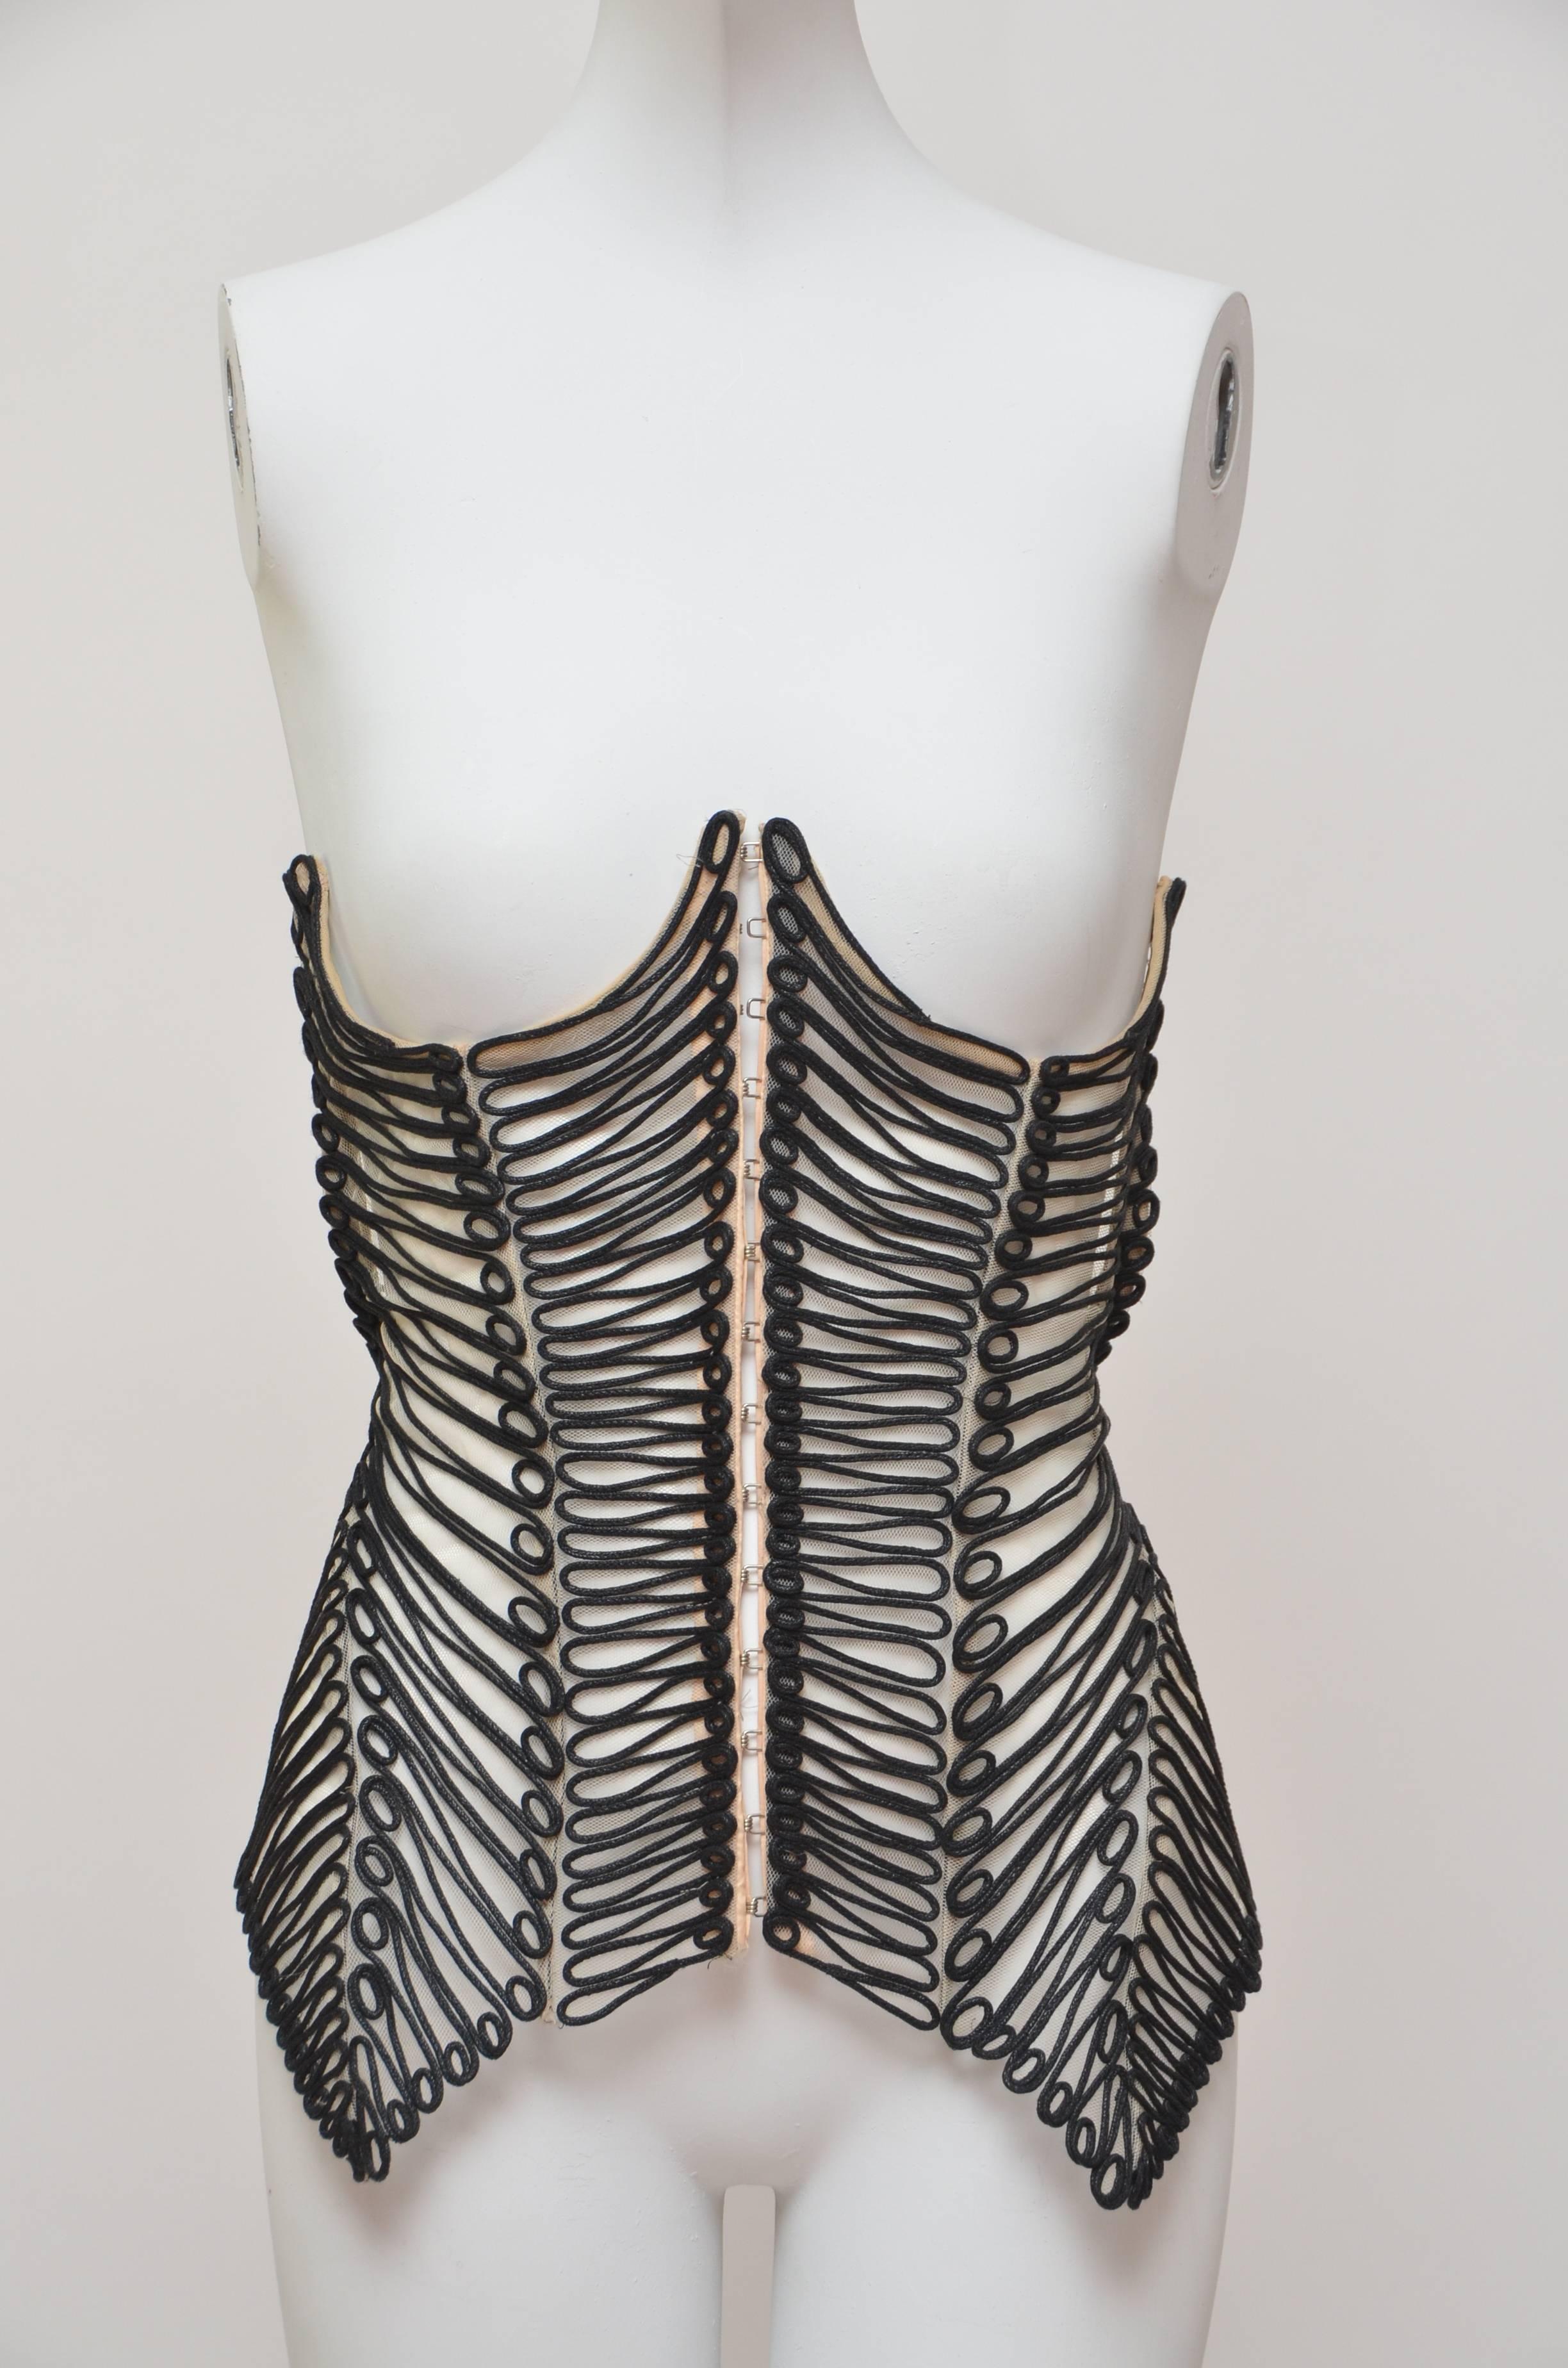 Women's or Men's Gianfranco Ferre Embroidered  Corset With Matching Bollero Jacket '02 Runway 